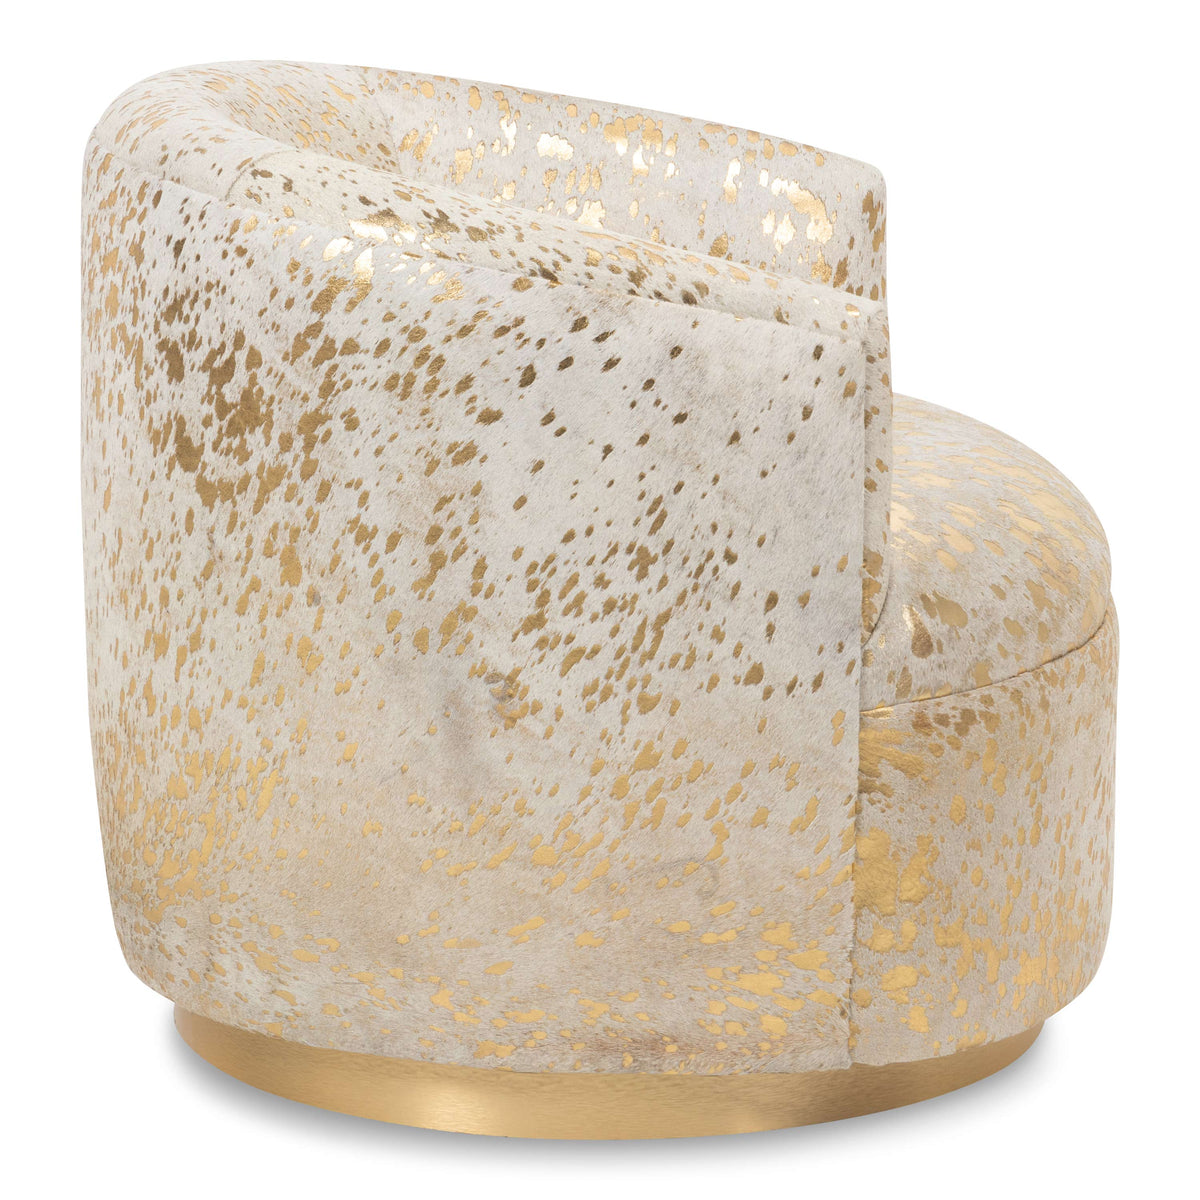 Club 2 Chair in Gold Speckled Cowhide